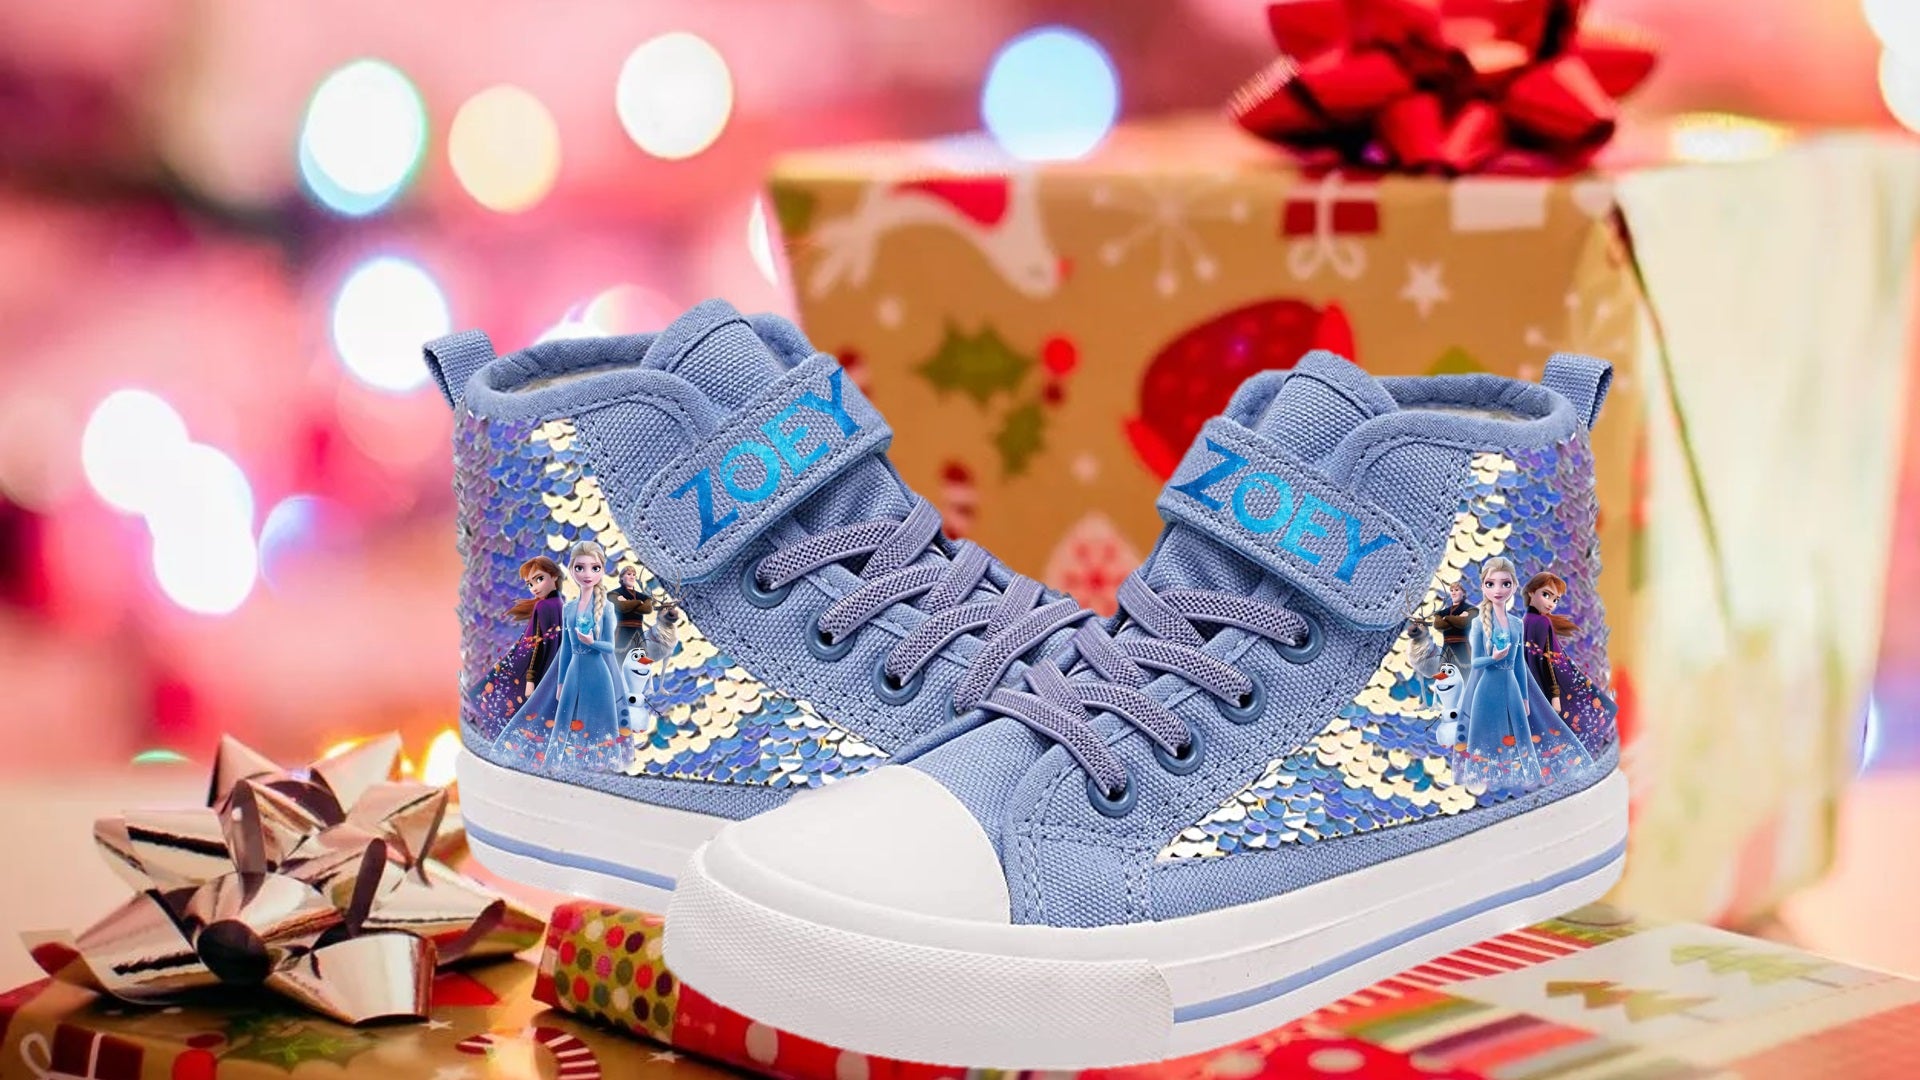 Frozen Anna and Elsa Girl's High-Top Shoes Blue